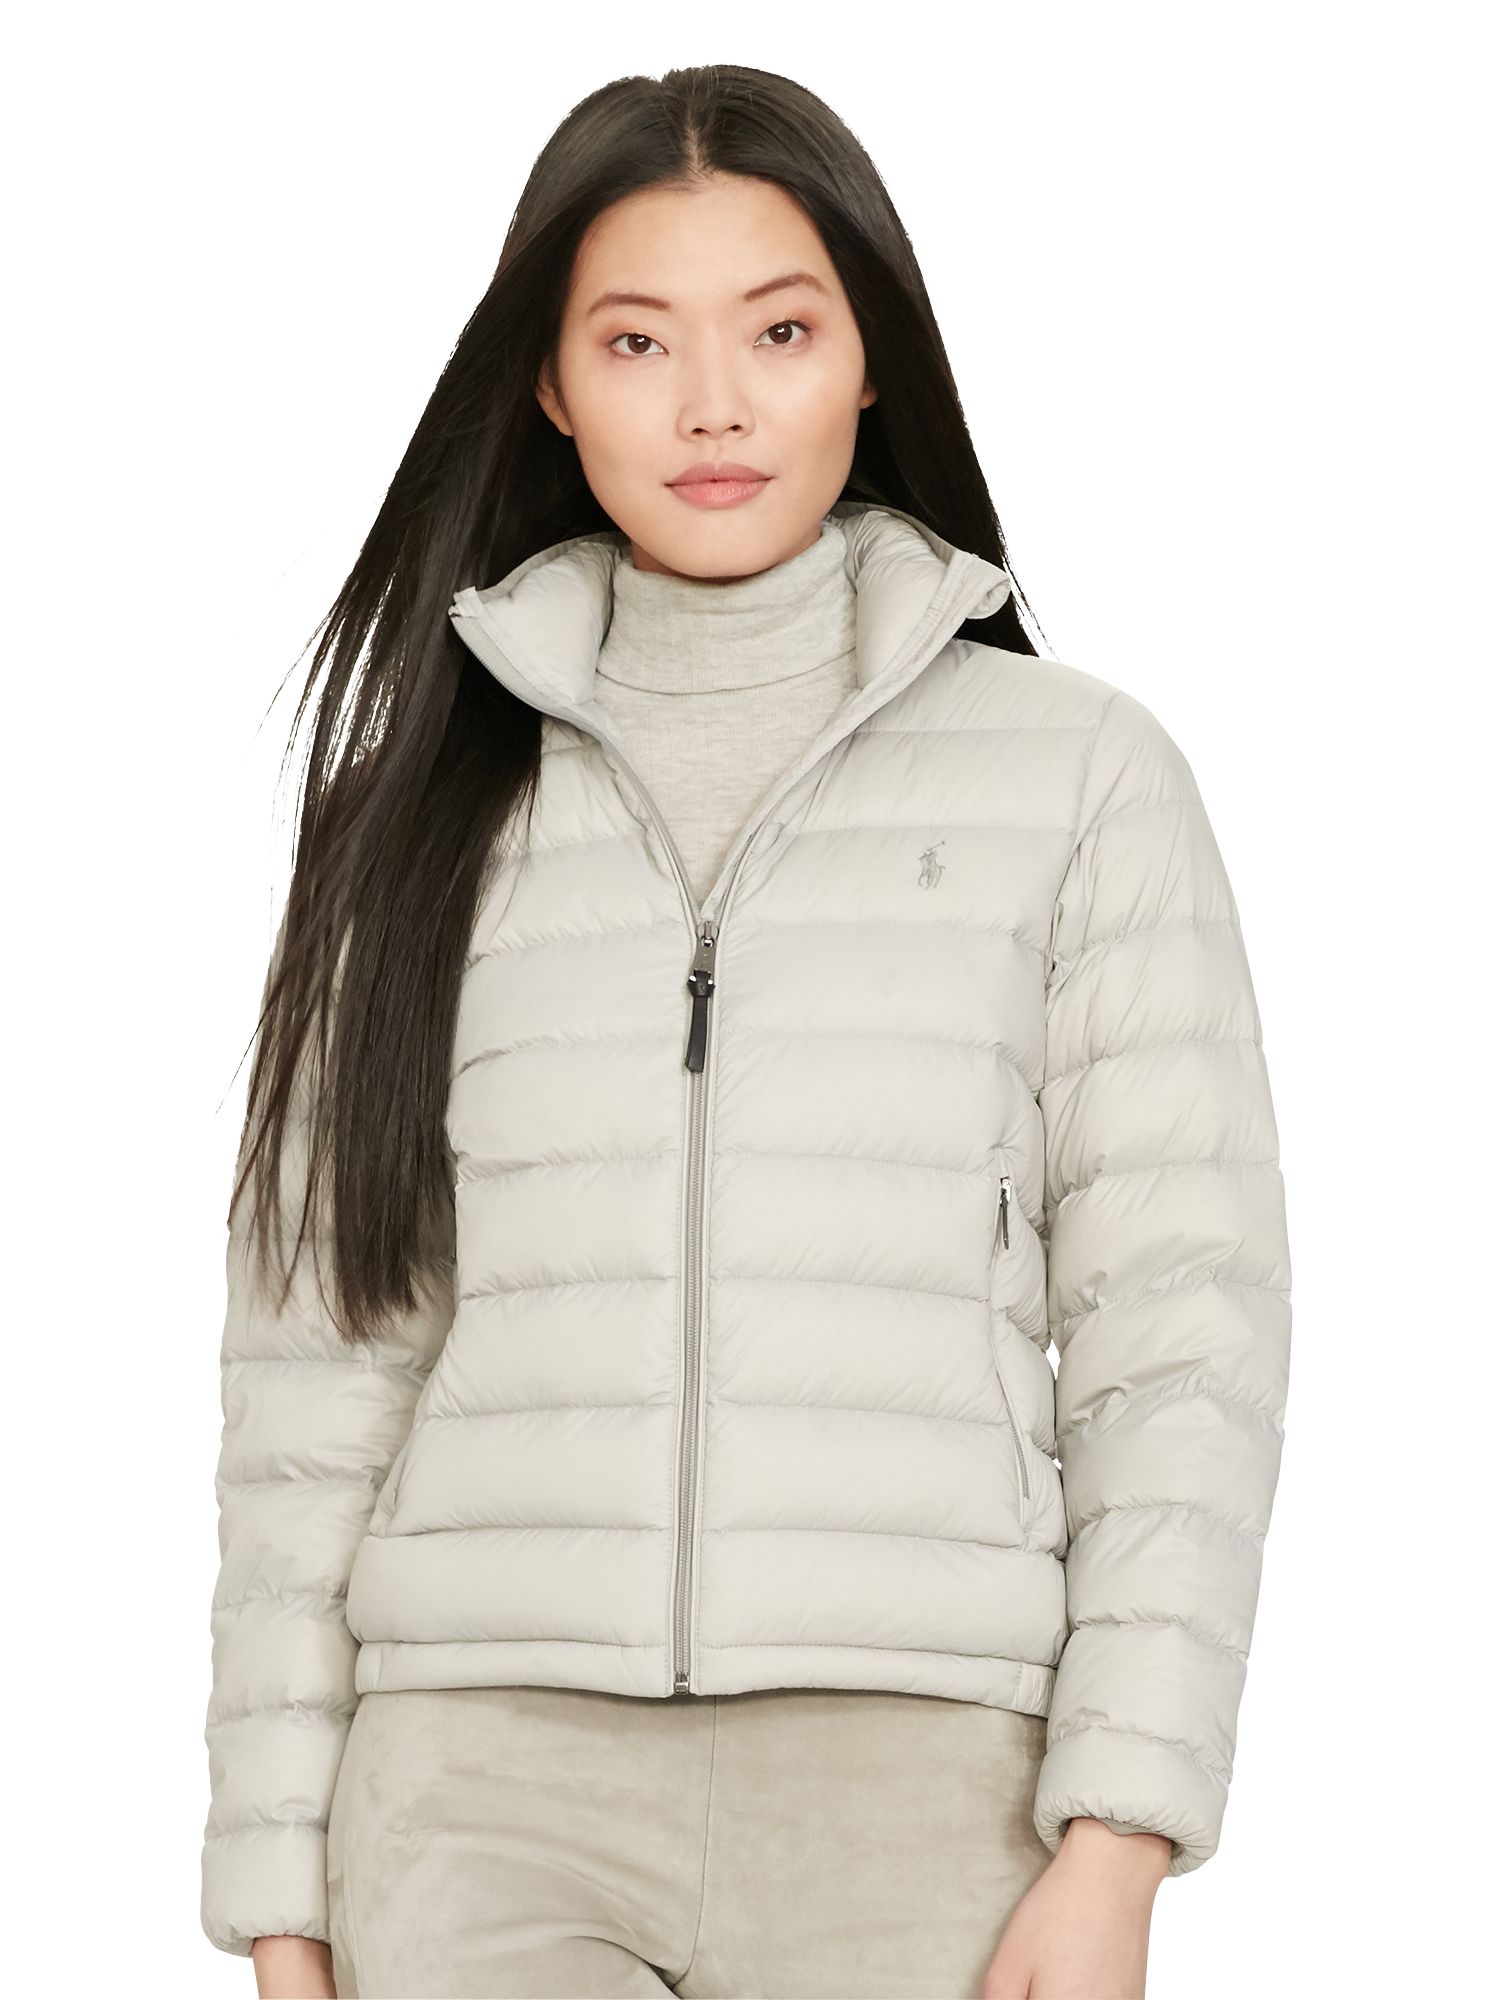 polo quilted jacket womens